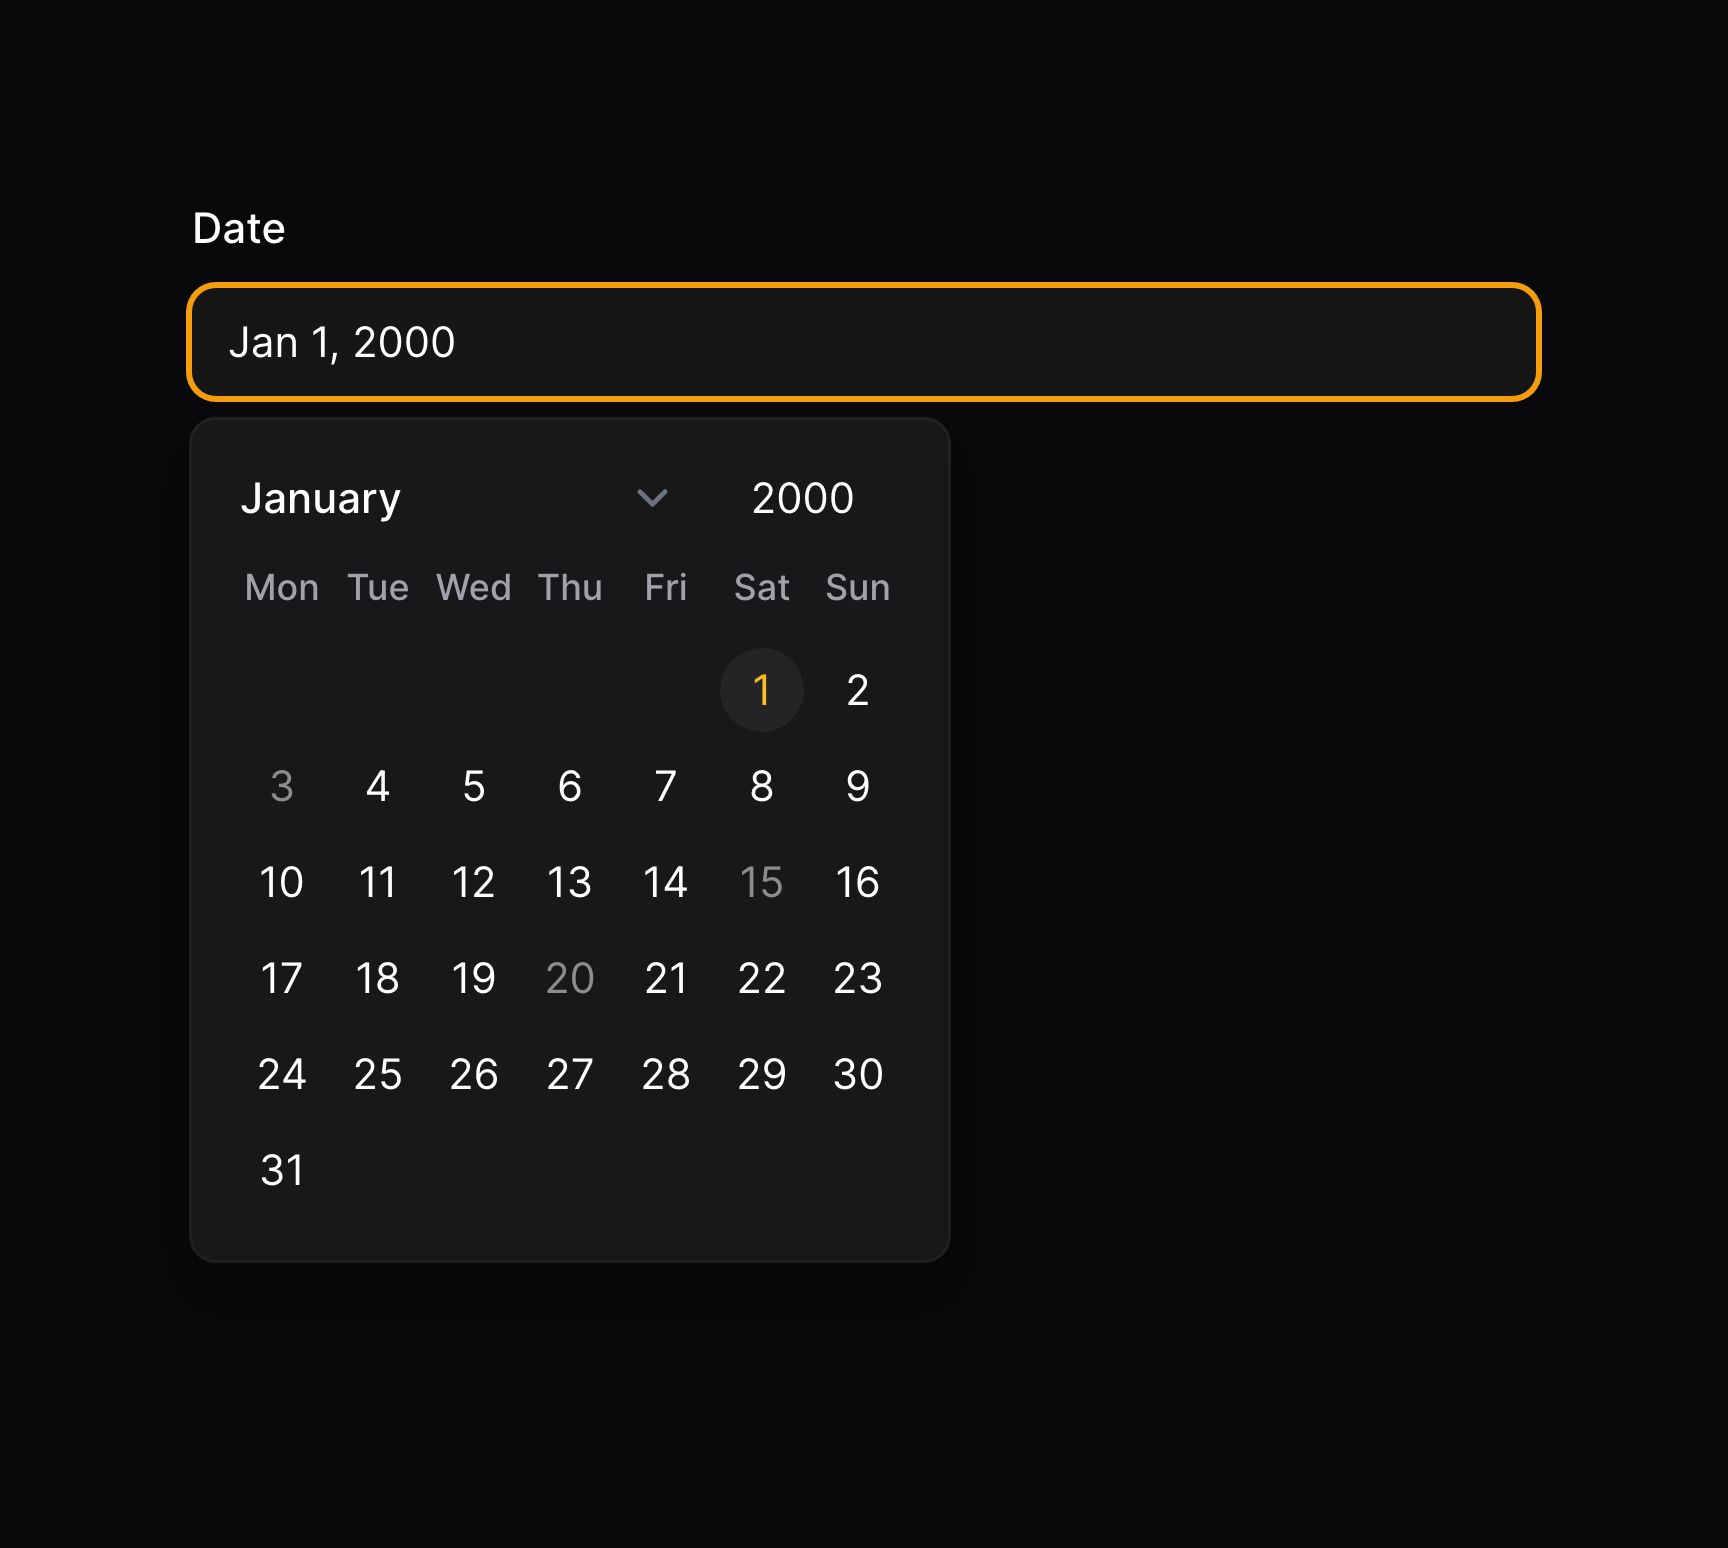 Date time picker where dates are disabled